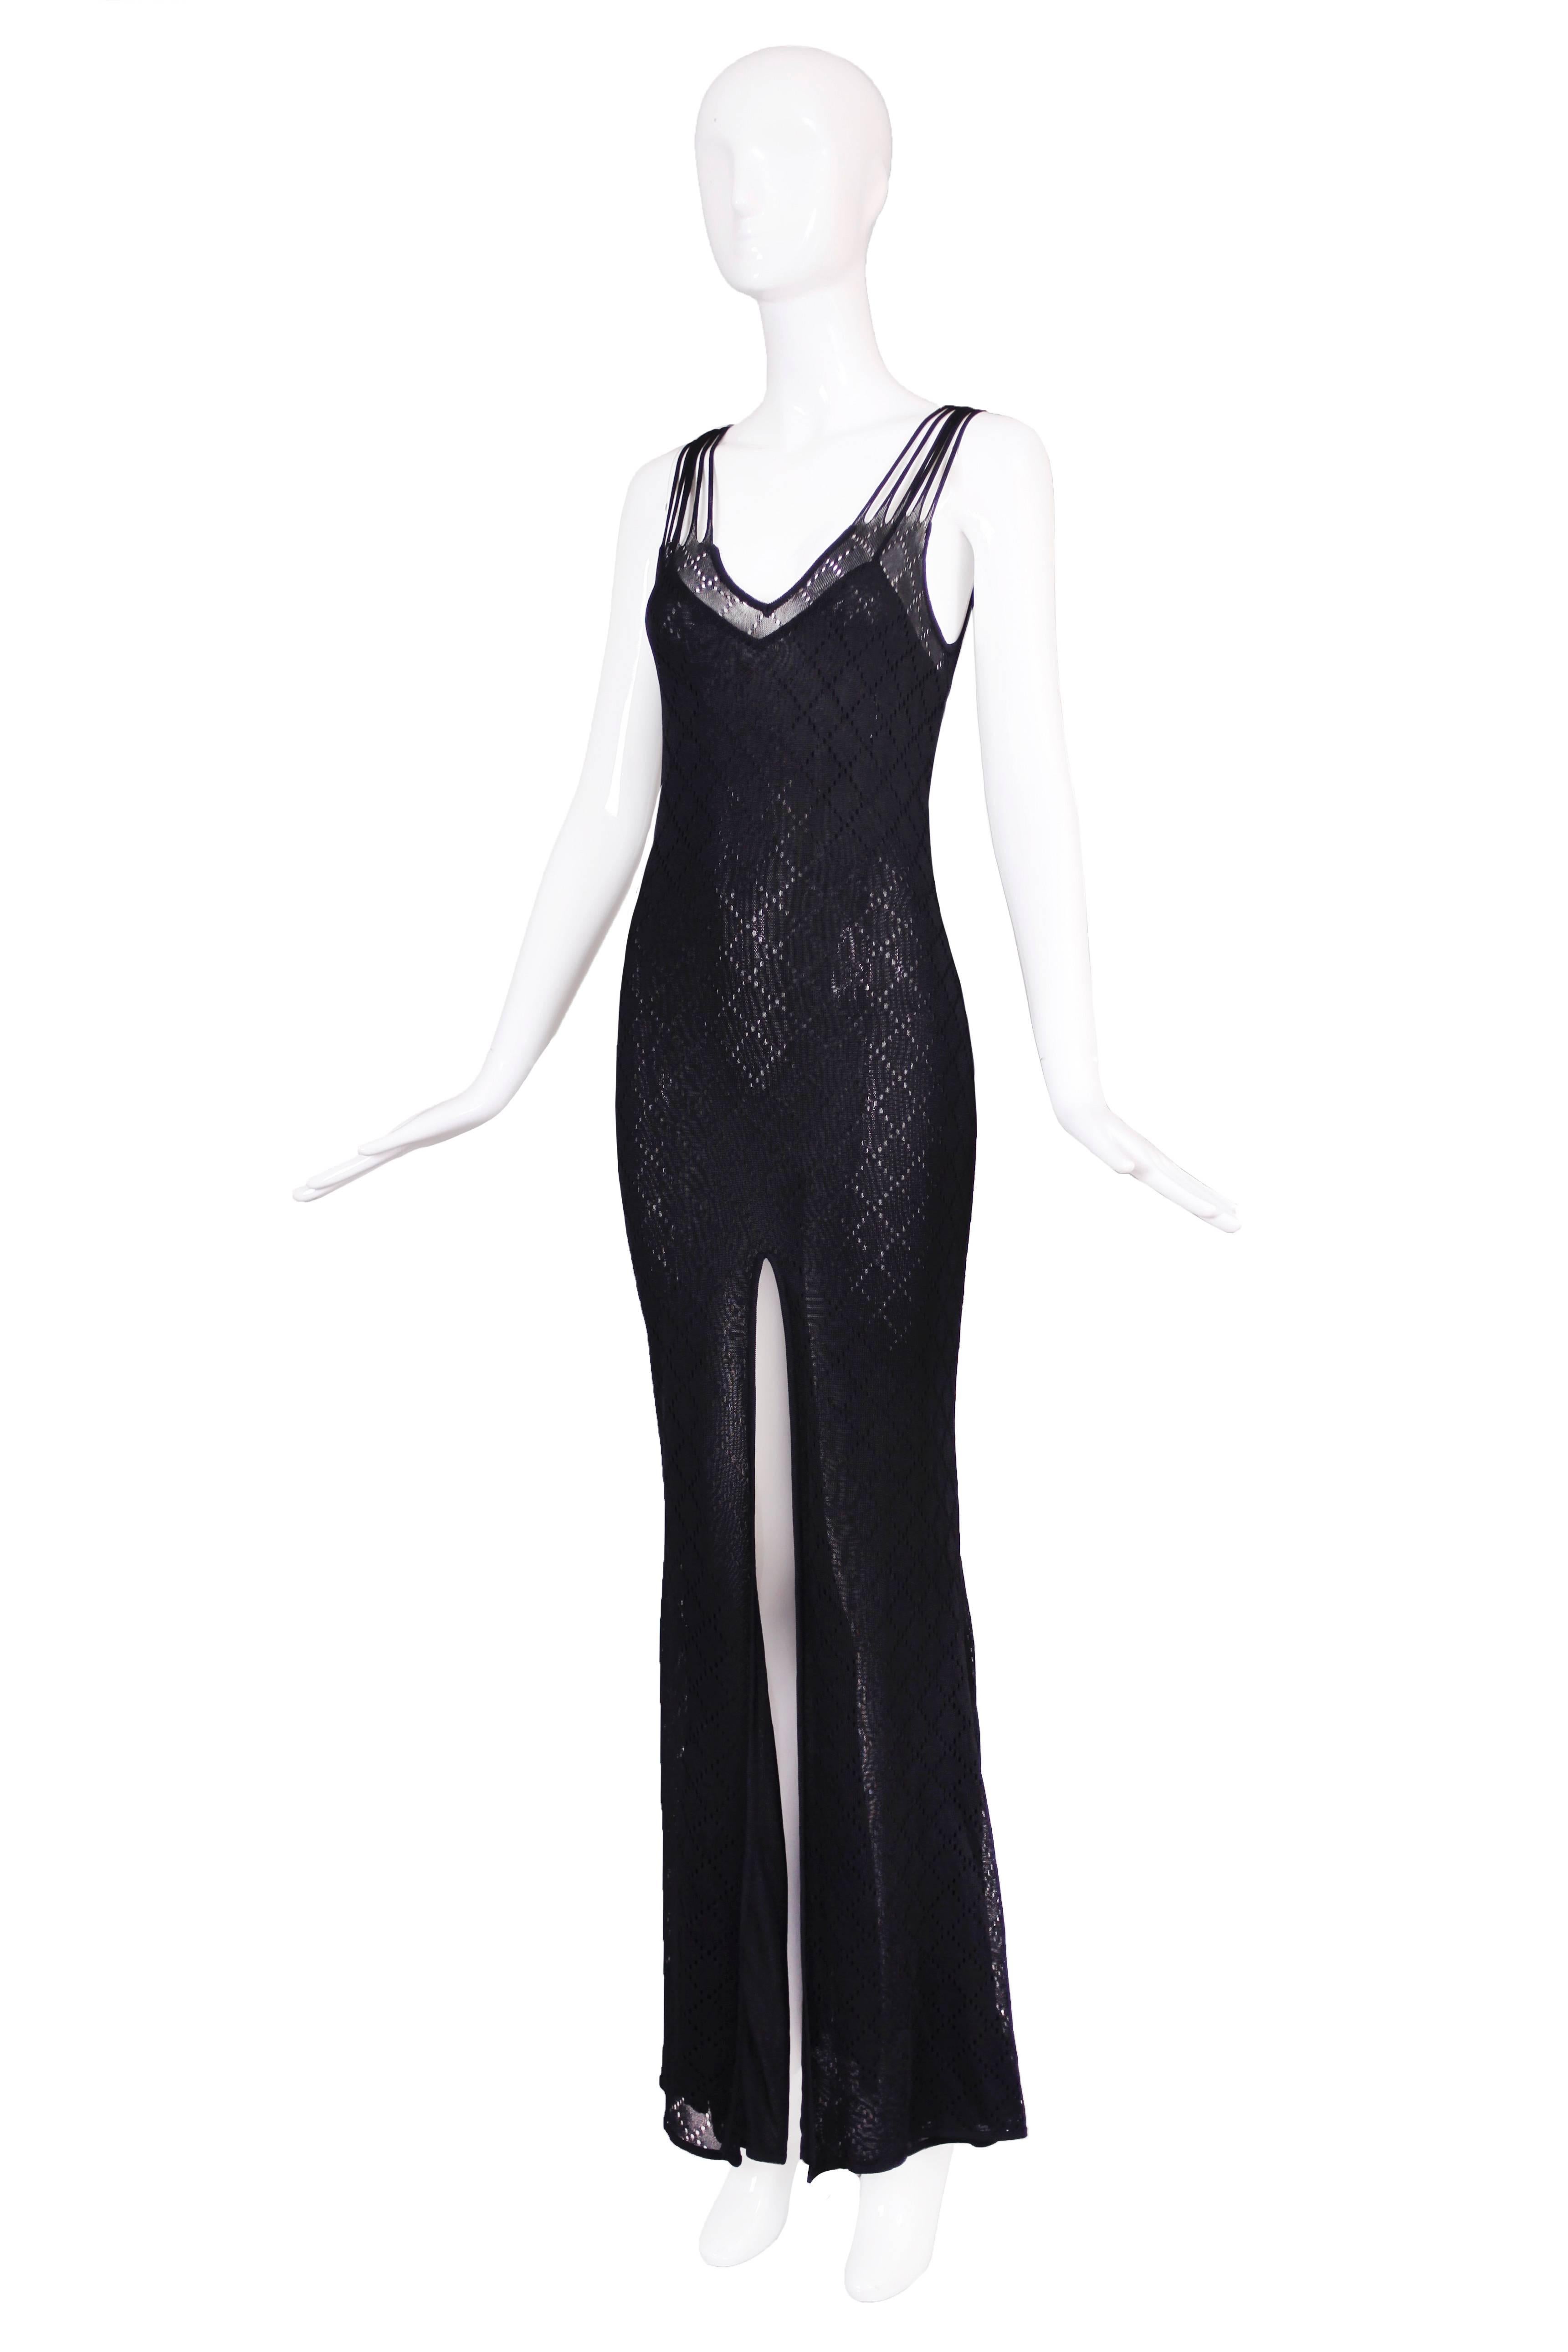 Christian Dior black sleeveless evening gown with dramatic frontal slit, diamond pattern and illusion back. In excellent condition. Size tag US 8, fabric is 100% viscose.